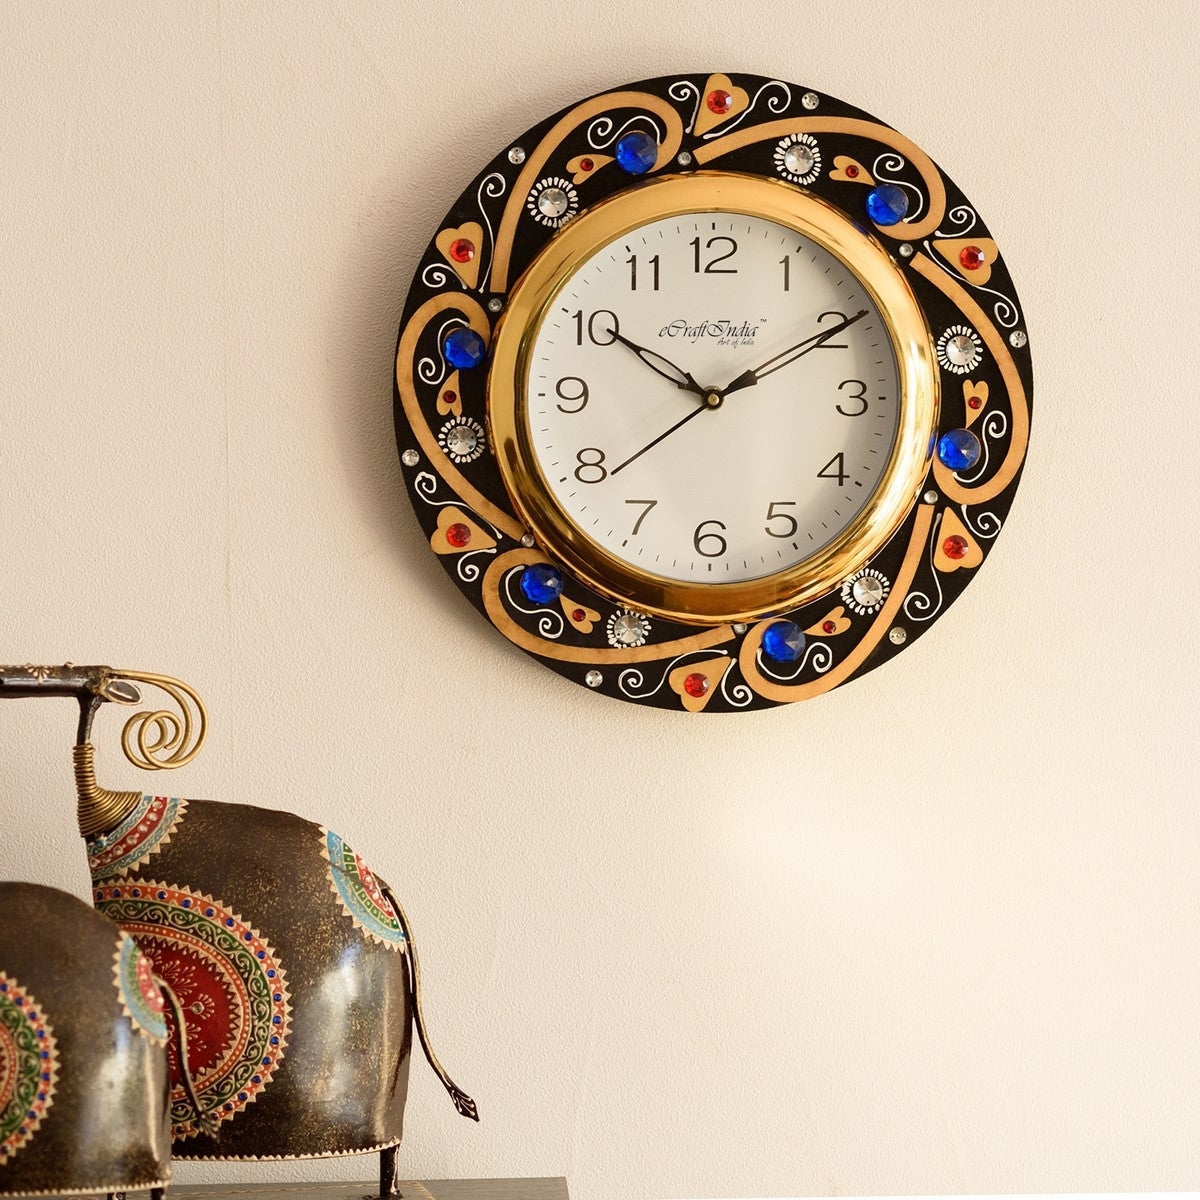 Crystal Studded Decorative Handicrafted Round Shape Papier-Mache Wooden Wall Clock 1